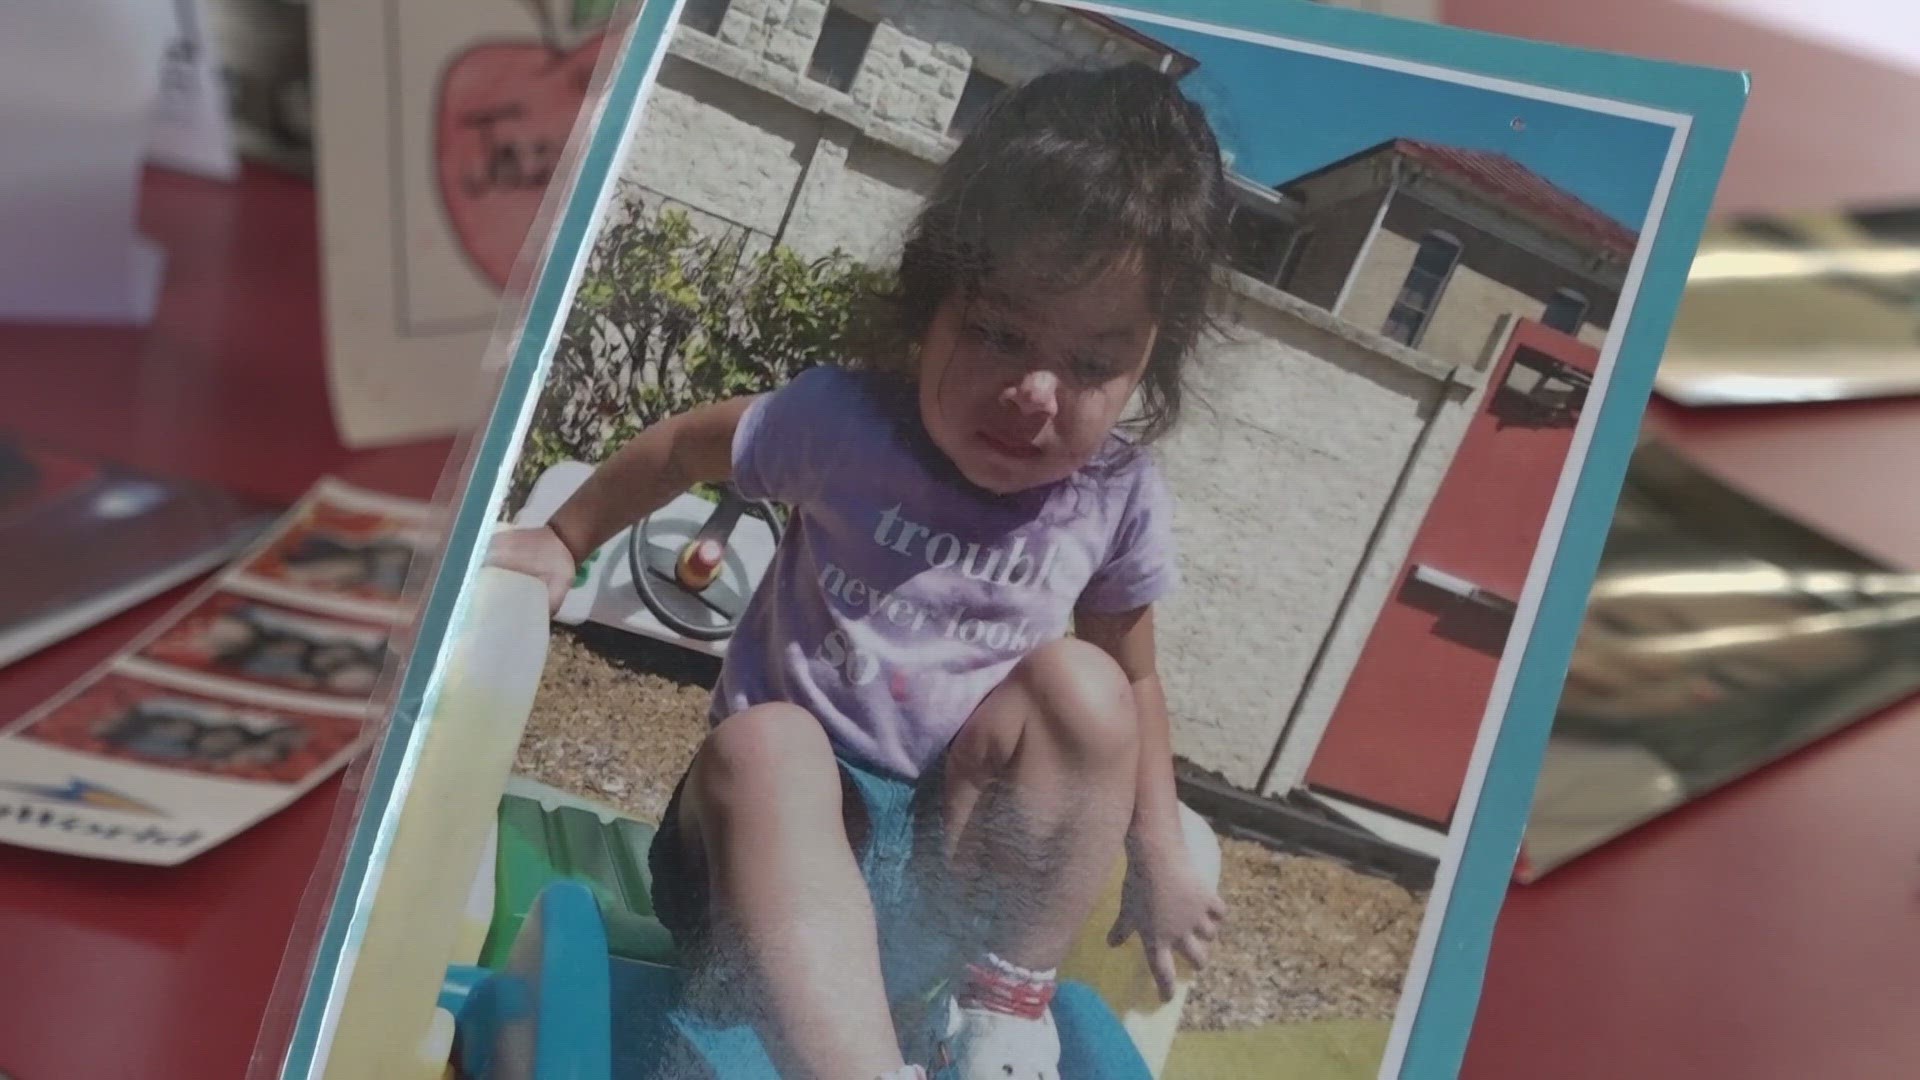 Police said the 4-year-old girl appeared to have drowned in her family's above-ground pool Wednesday evening in a far-southwest-side neighborhood.